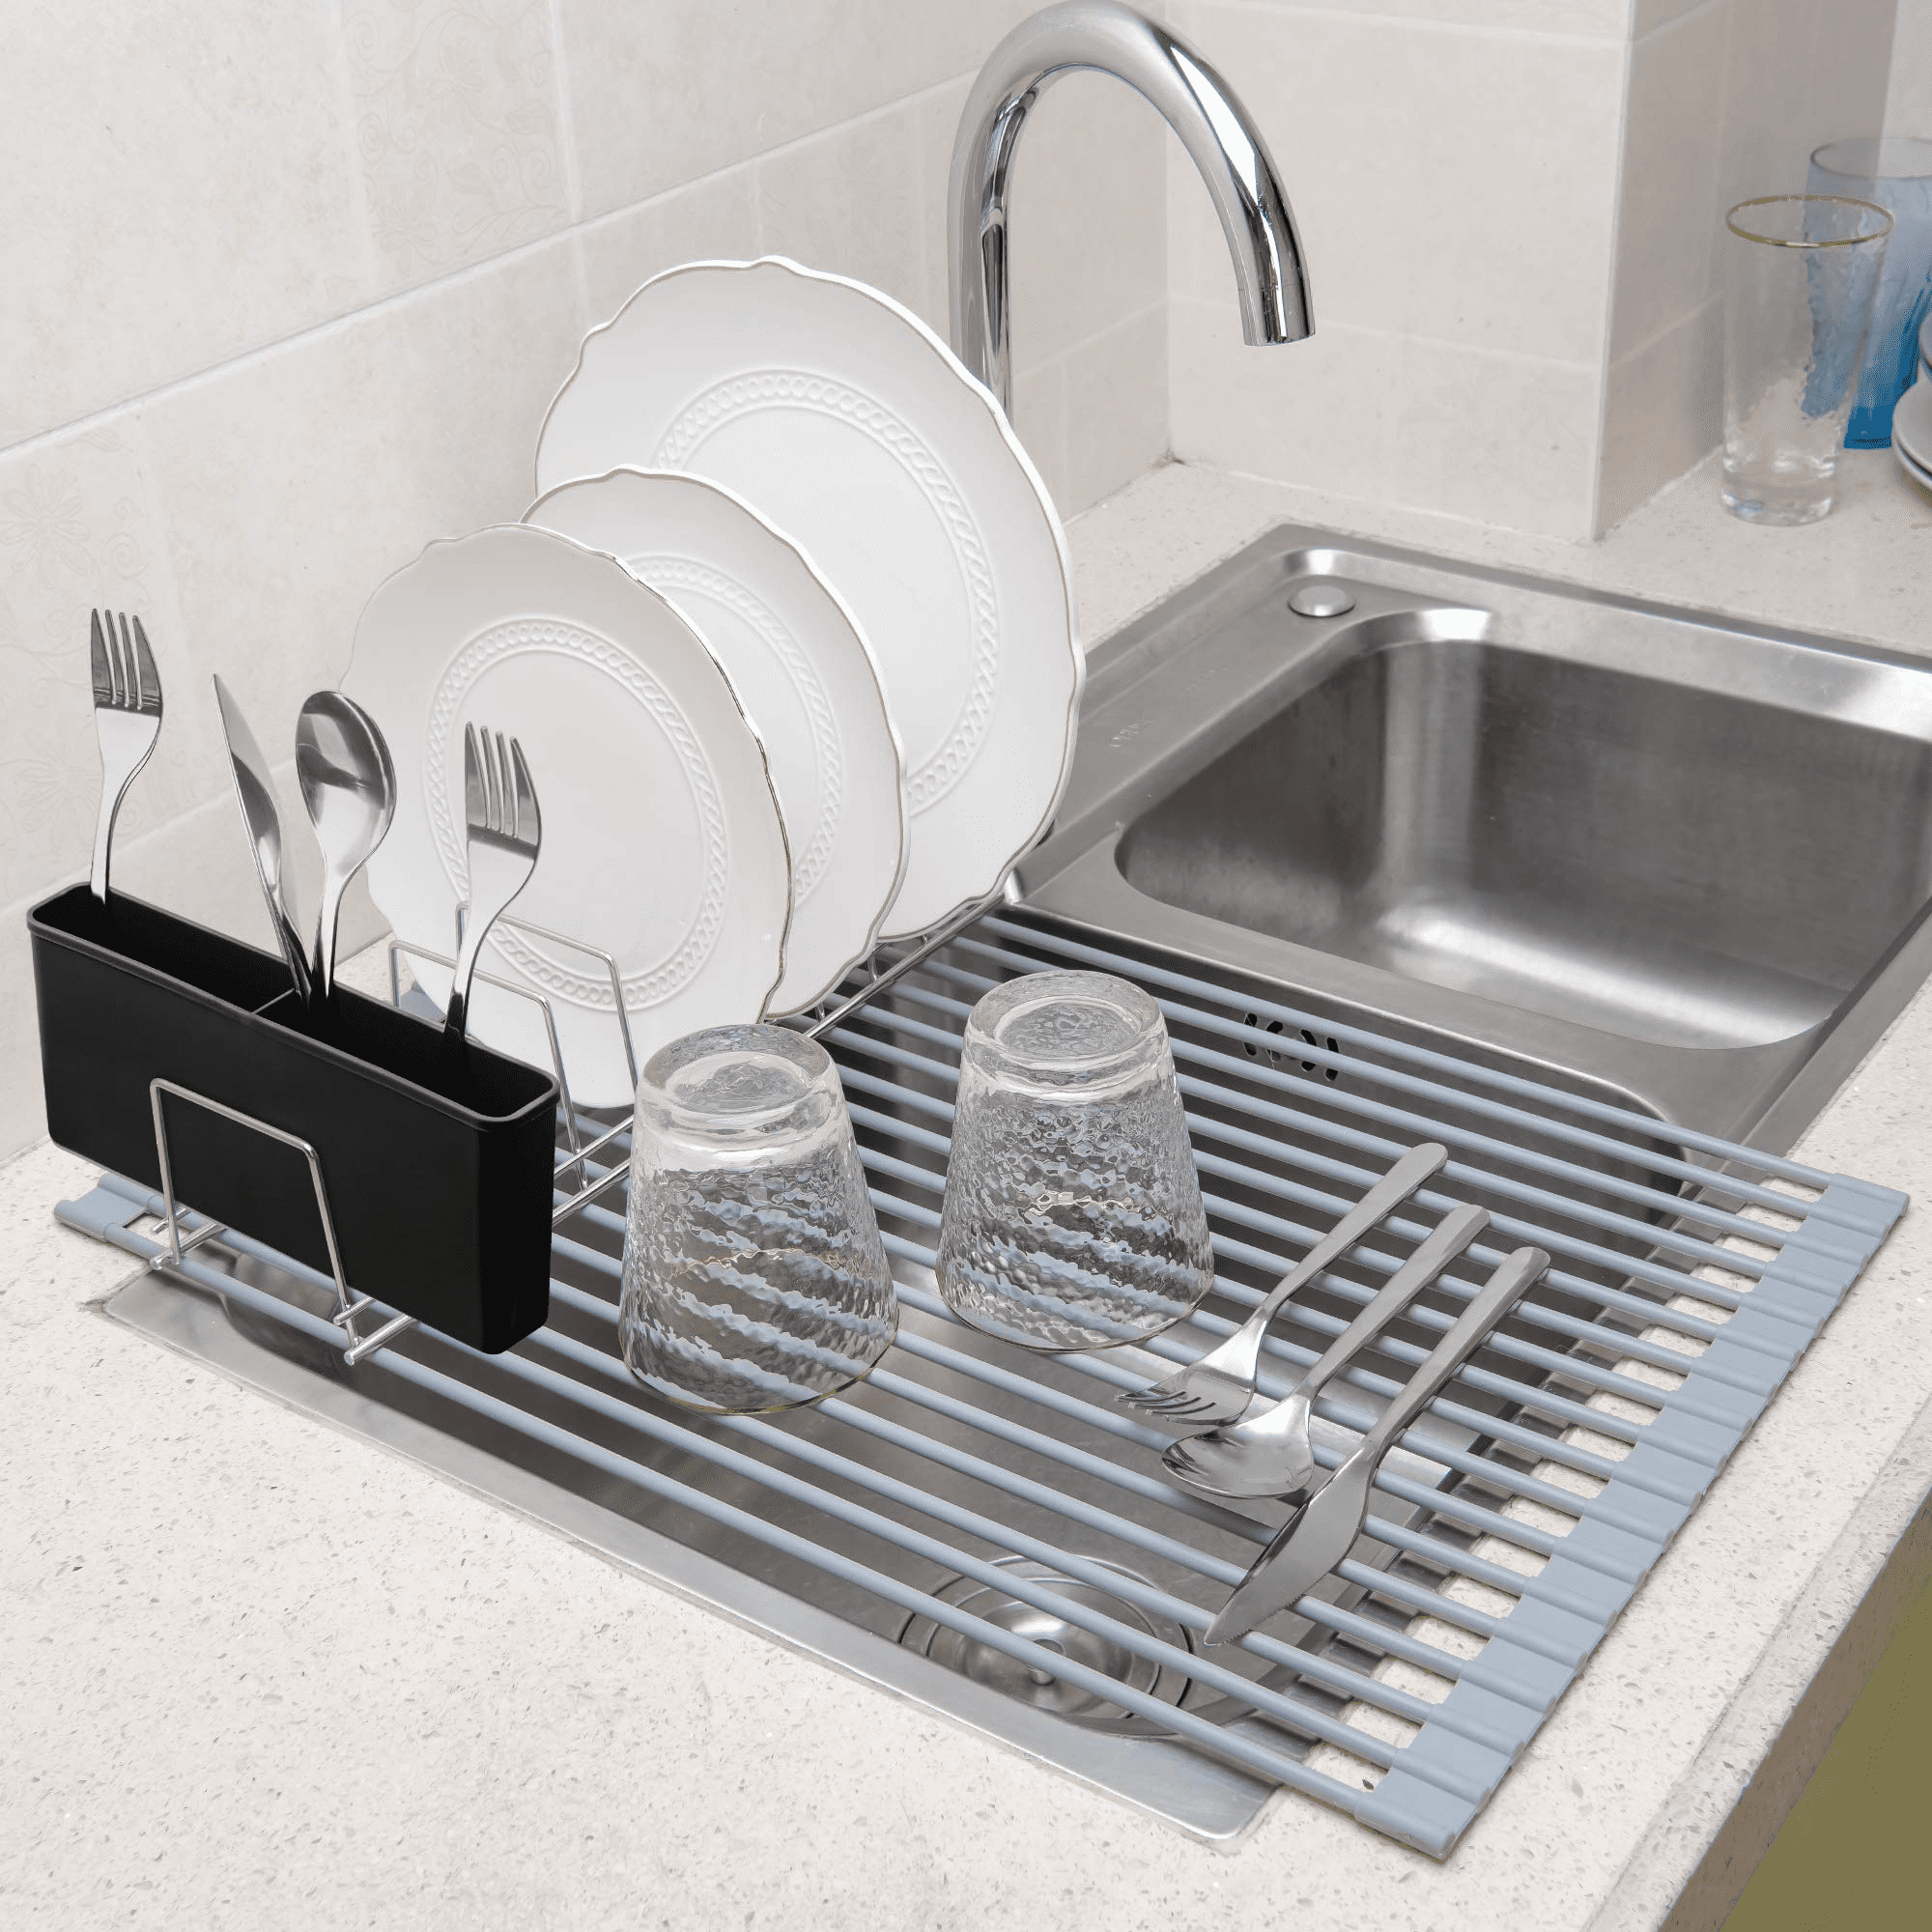 Oizeir Roll Up Dish Drying Rack - Silicone Coated Stainless Steel, Over The  Sink, Foldable, Heat-Resistant, Anti-Slip, Dish Drainer. (17 x 12.5)